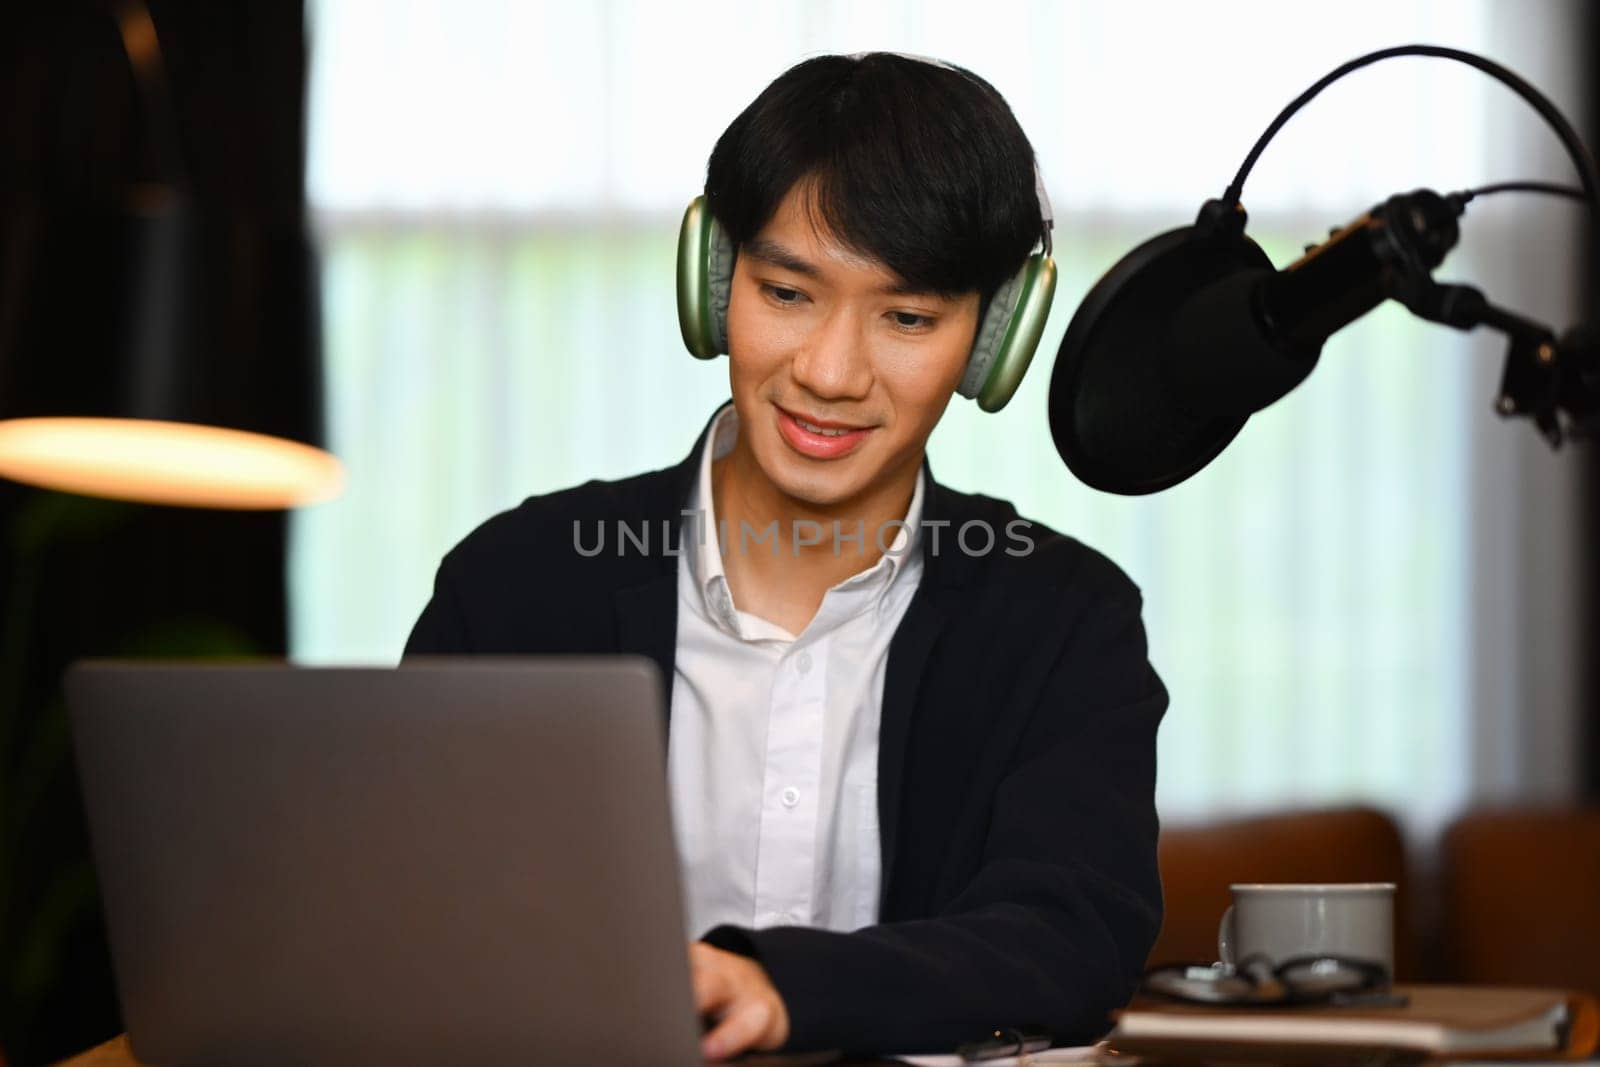 Man podcaster wearing headphone recording podcast from home studio. Radio, podcasts, blogging and technology concept.